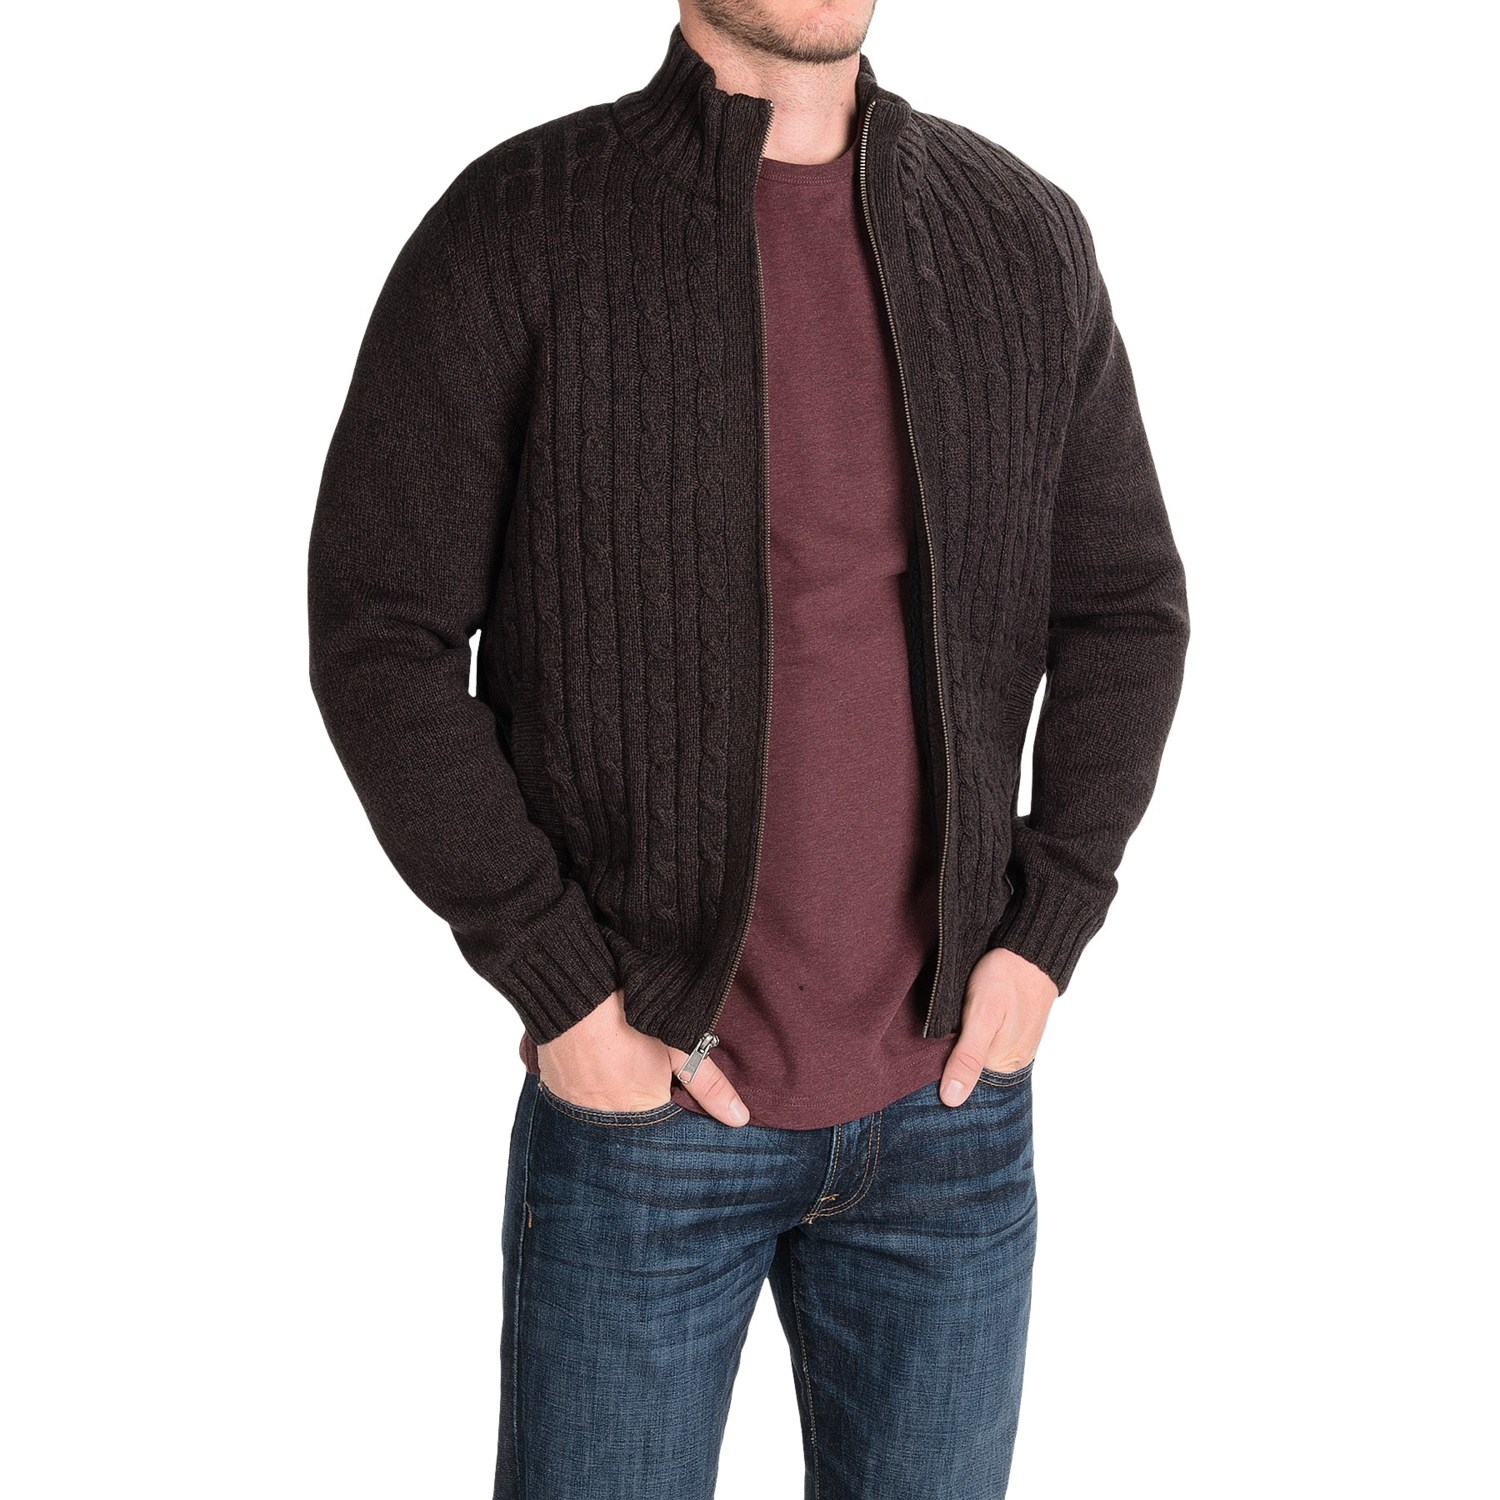 Boston Traders Full-Cable Sweater Jacket (For Men) 9923U - Save 82%